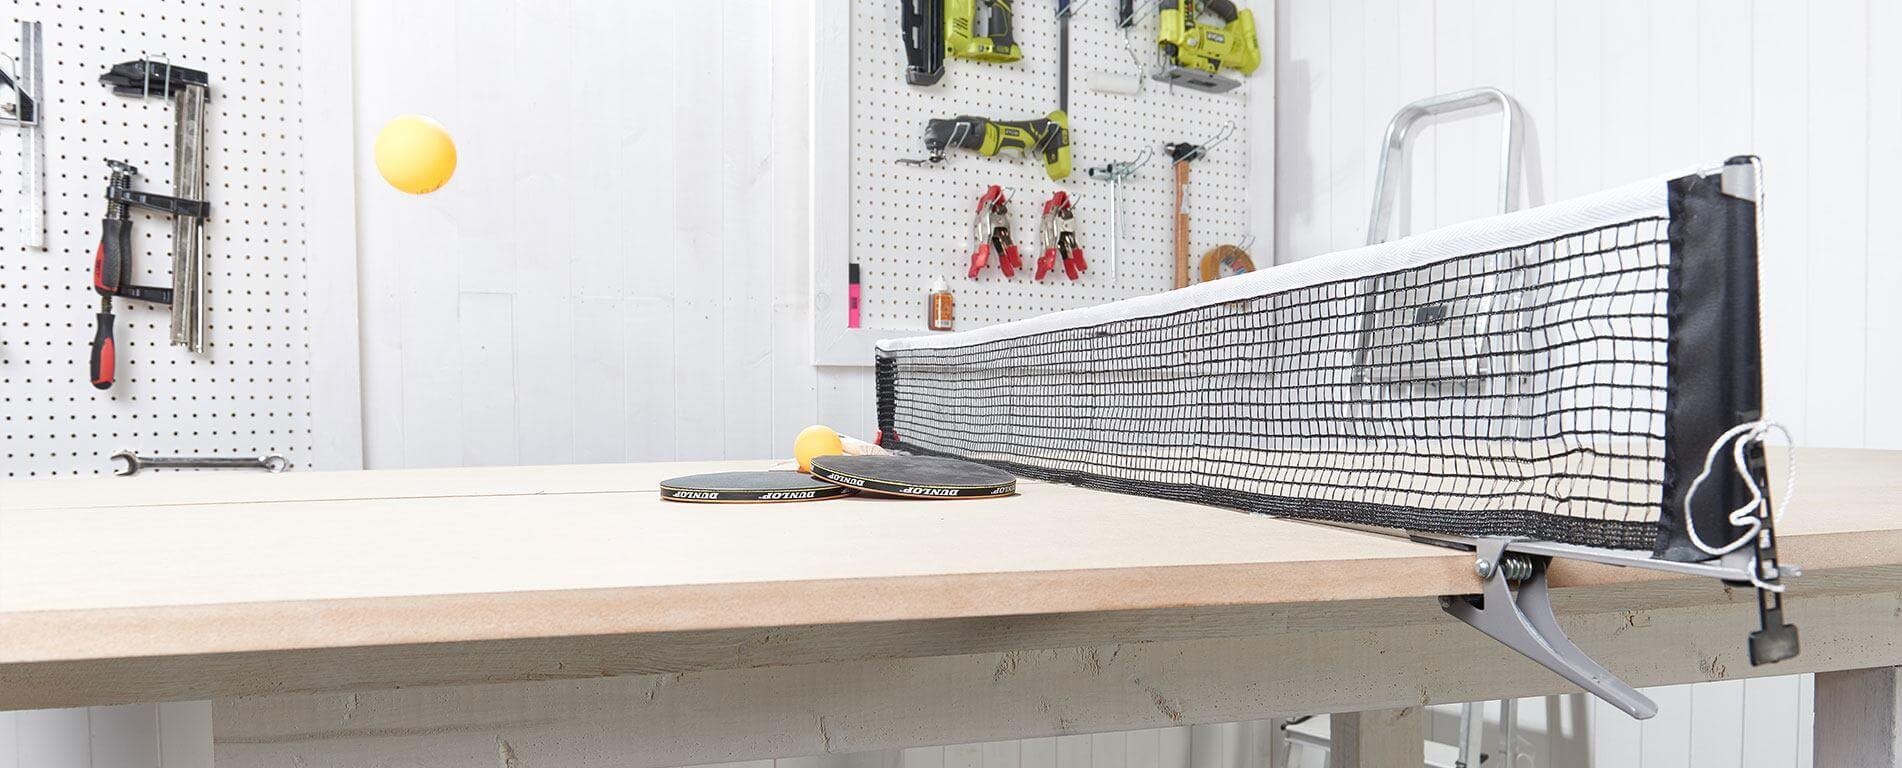 Transform Your Workbench Into A Ping Pong Table